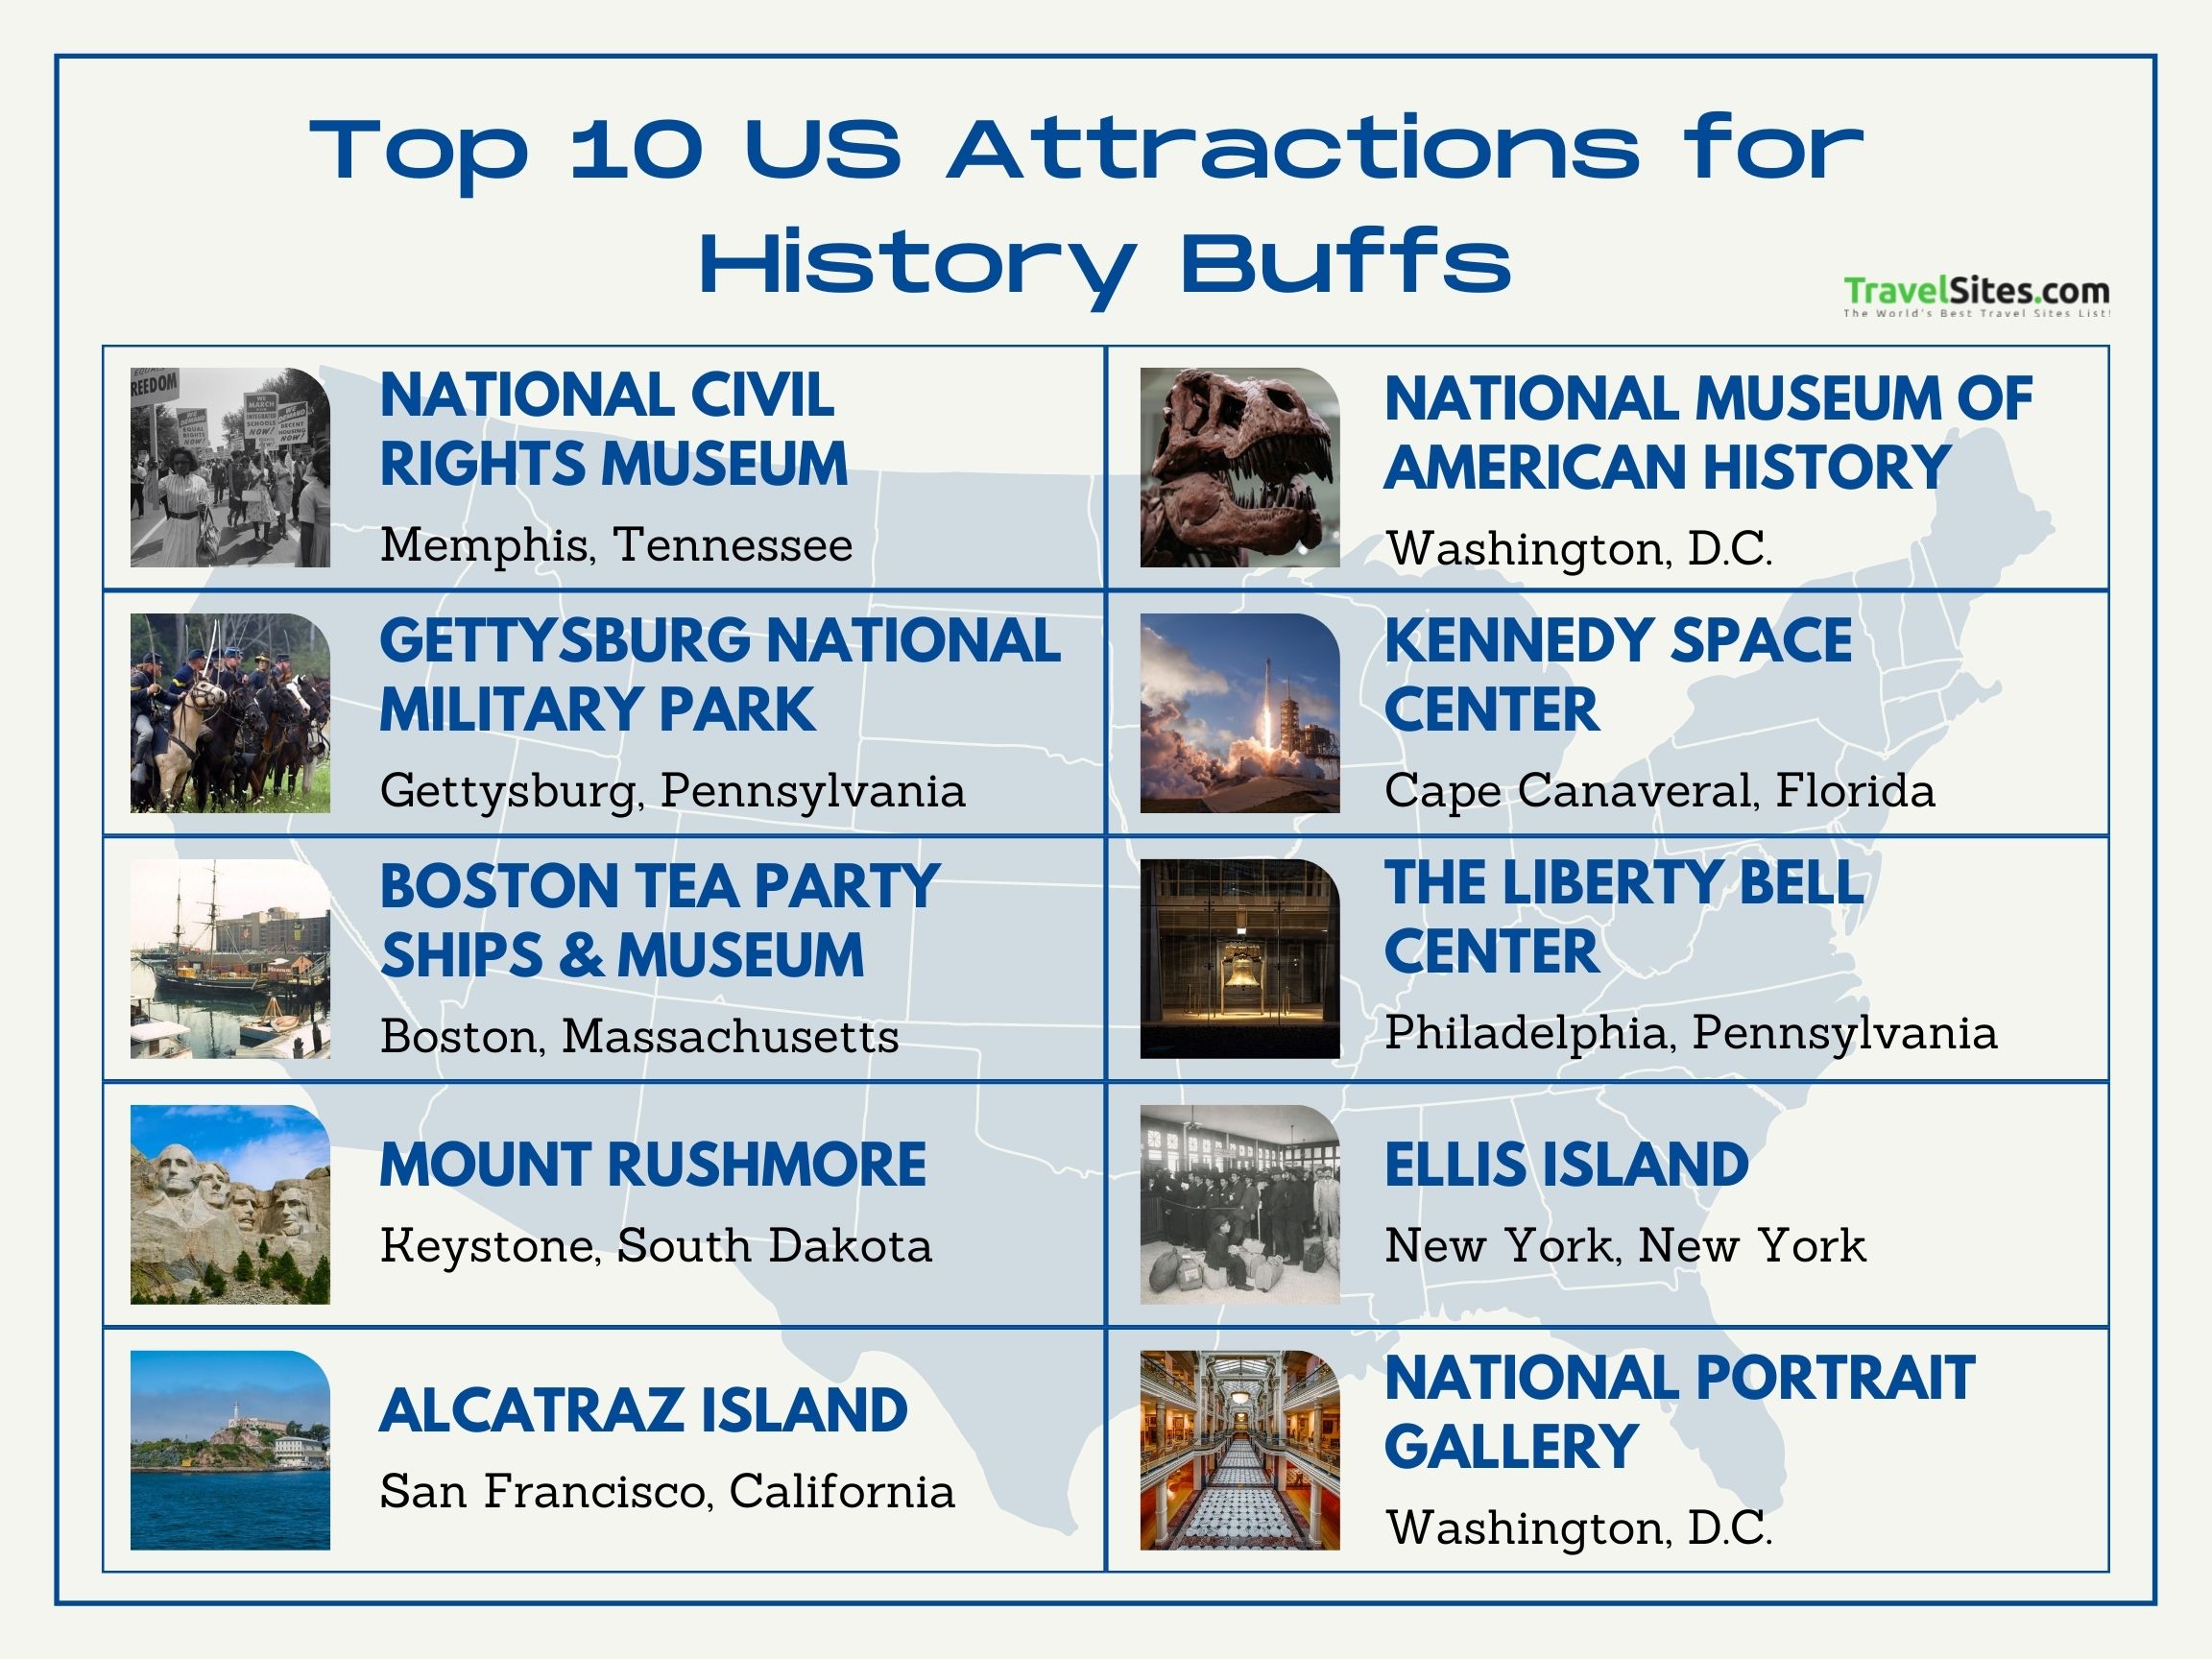 Top 10 US Attractions for History Buffs